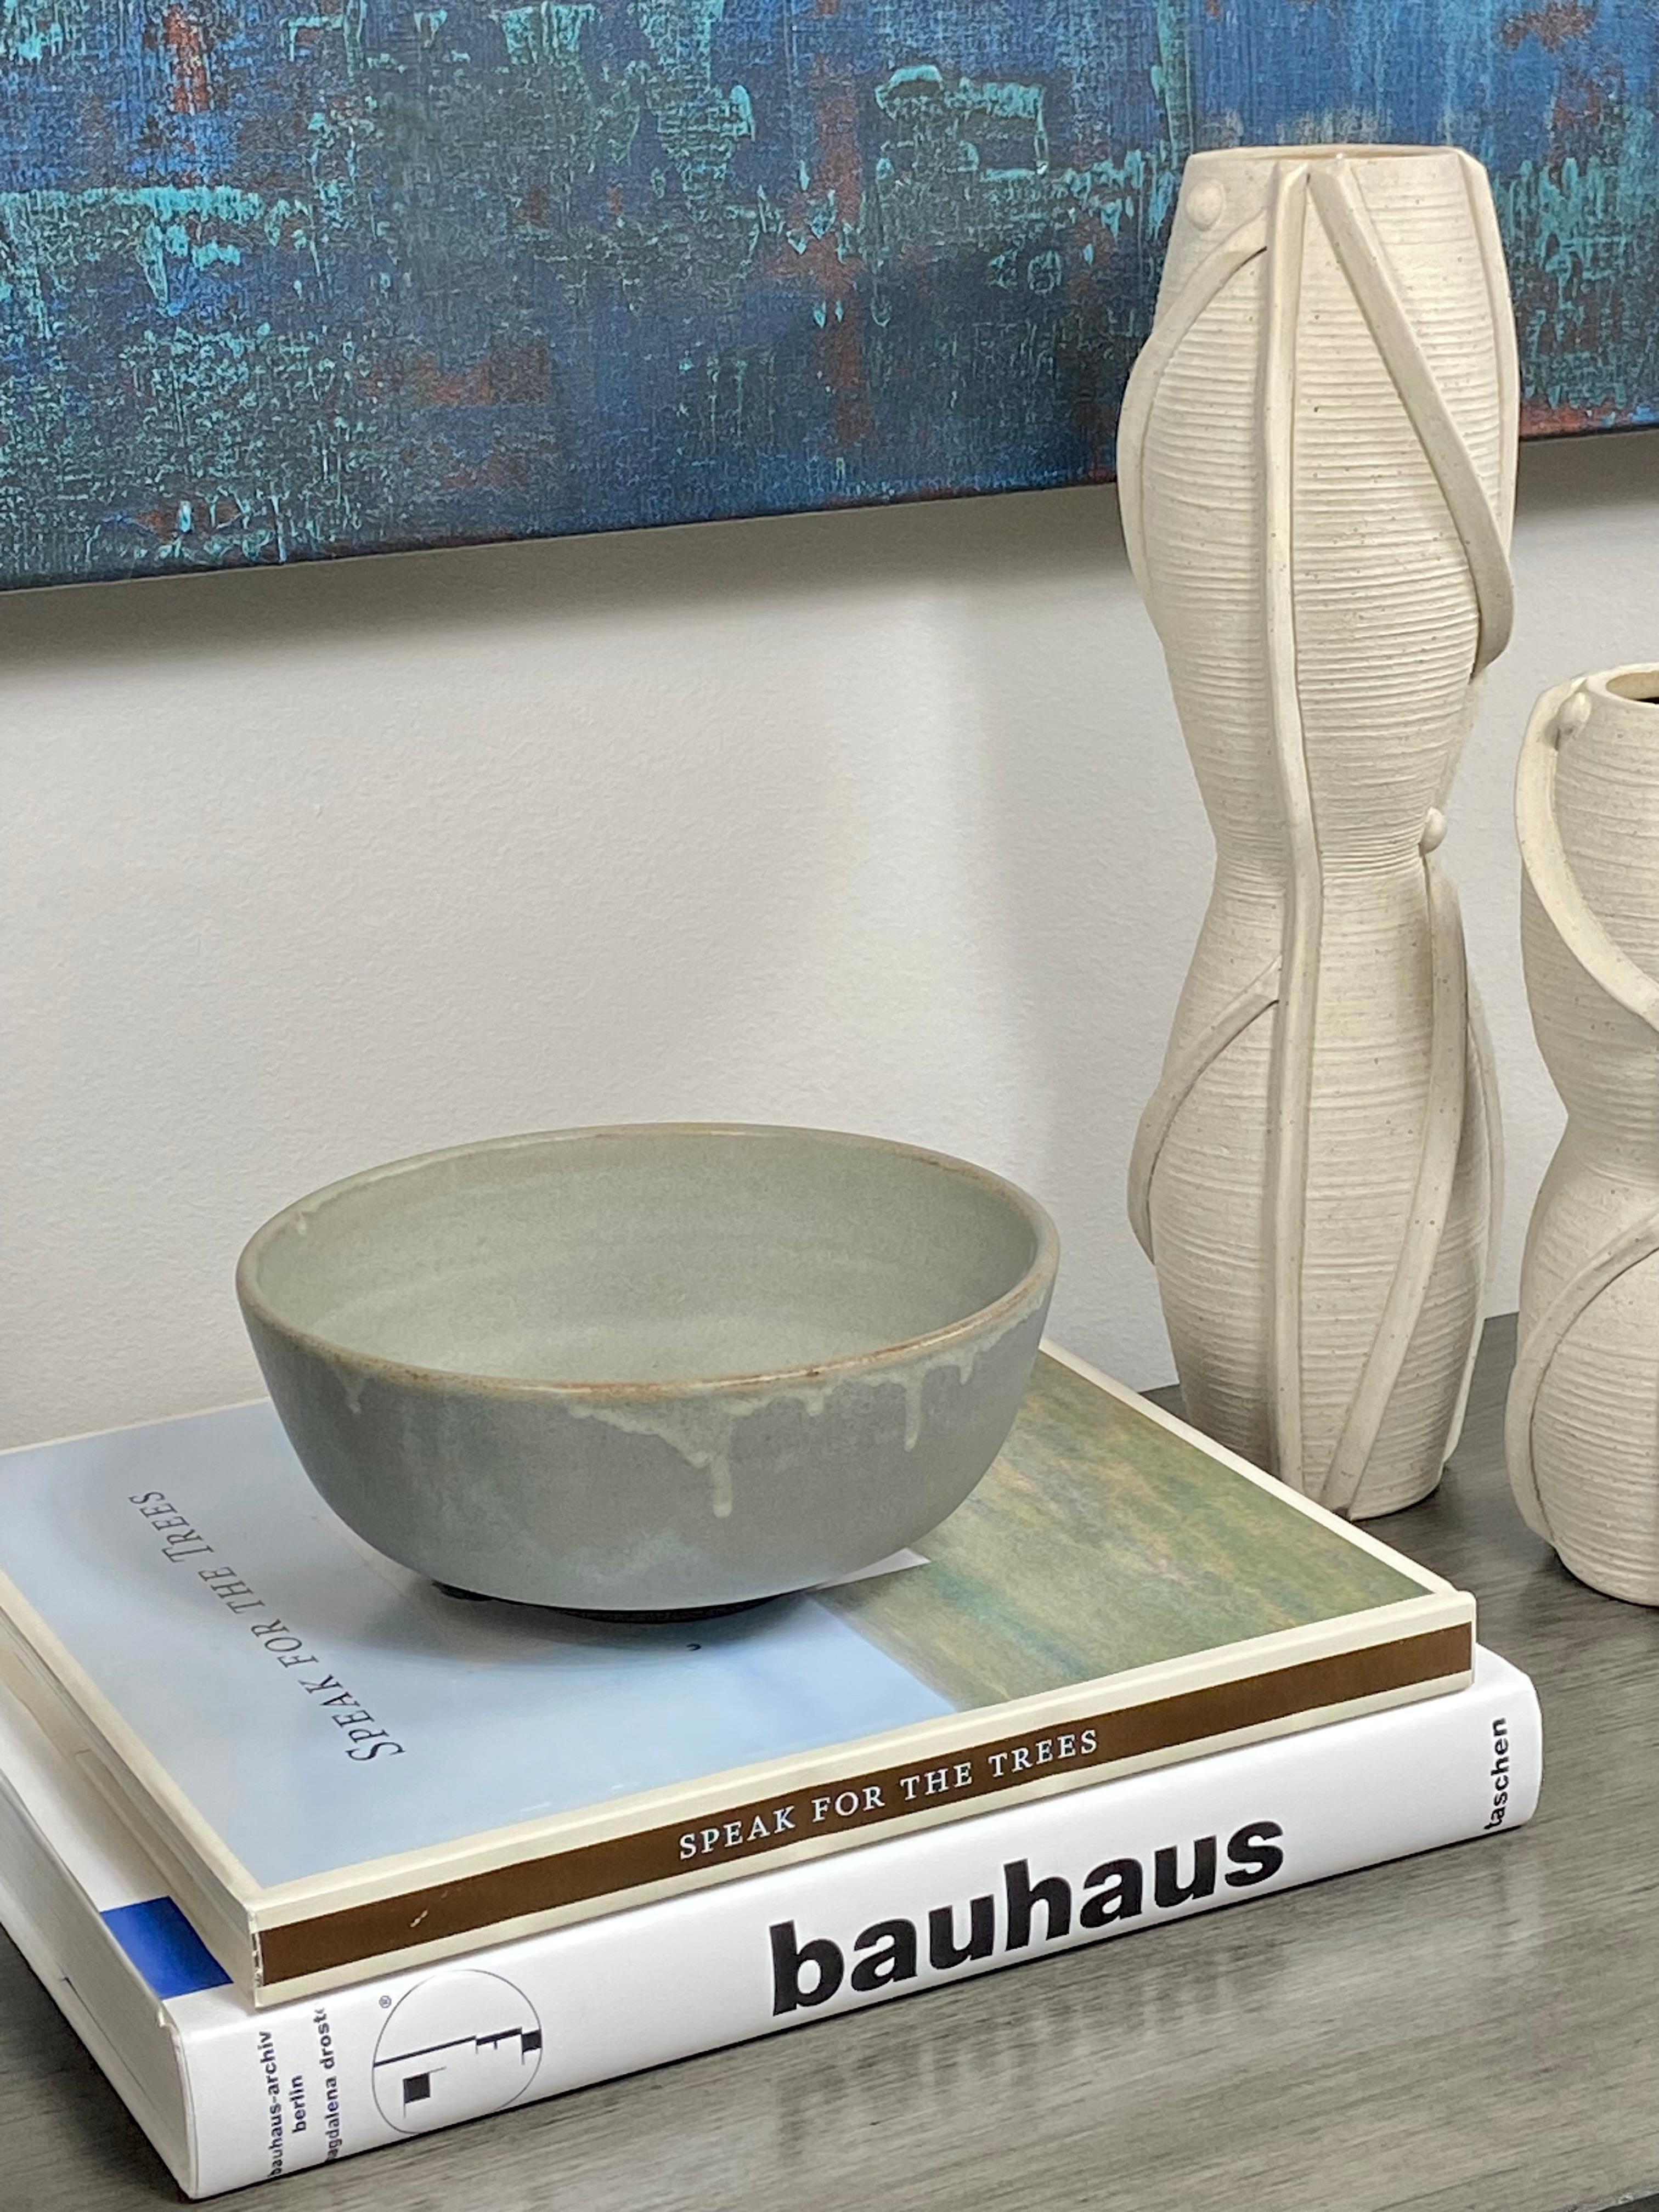 A lovely celadon glazed ceramic bowl. The intentional drip glaze adds a dimensionality to this beautiful and serene bowl. It is watertight to that you can use it functionally or just let it stand alone as a beautiful object. 